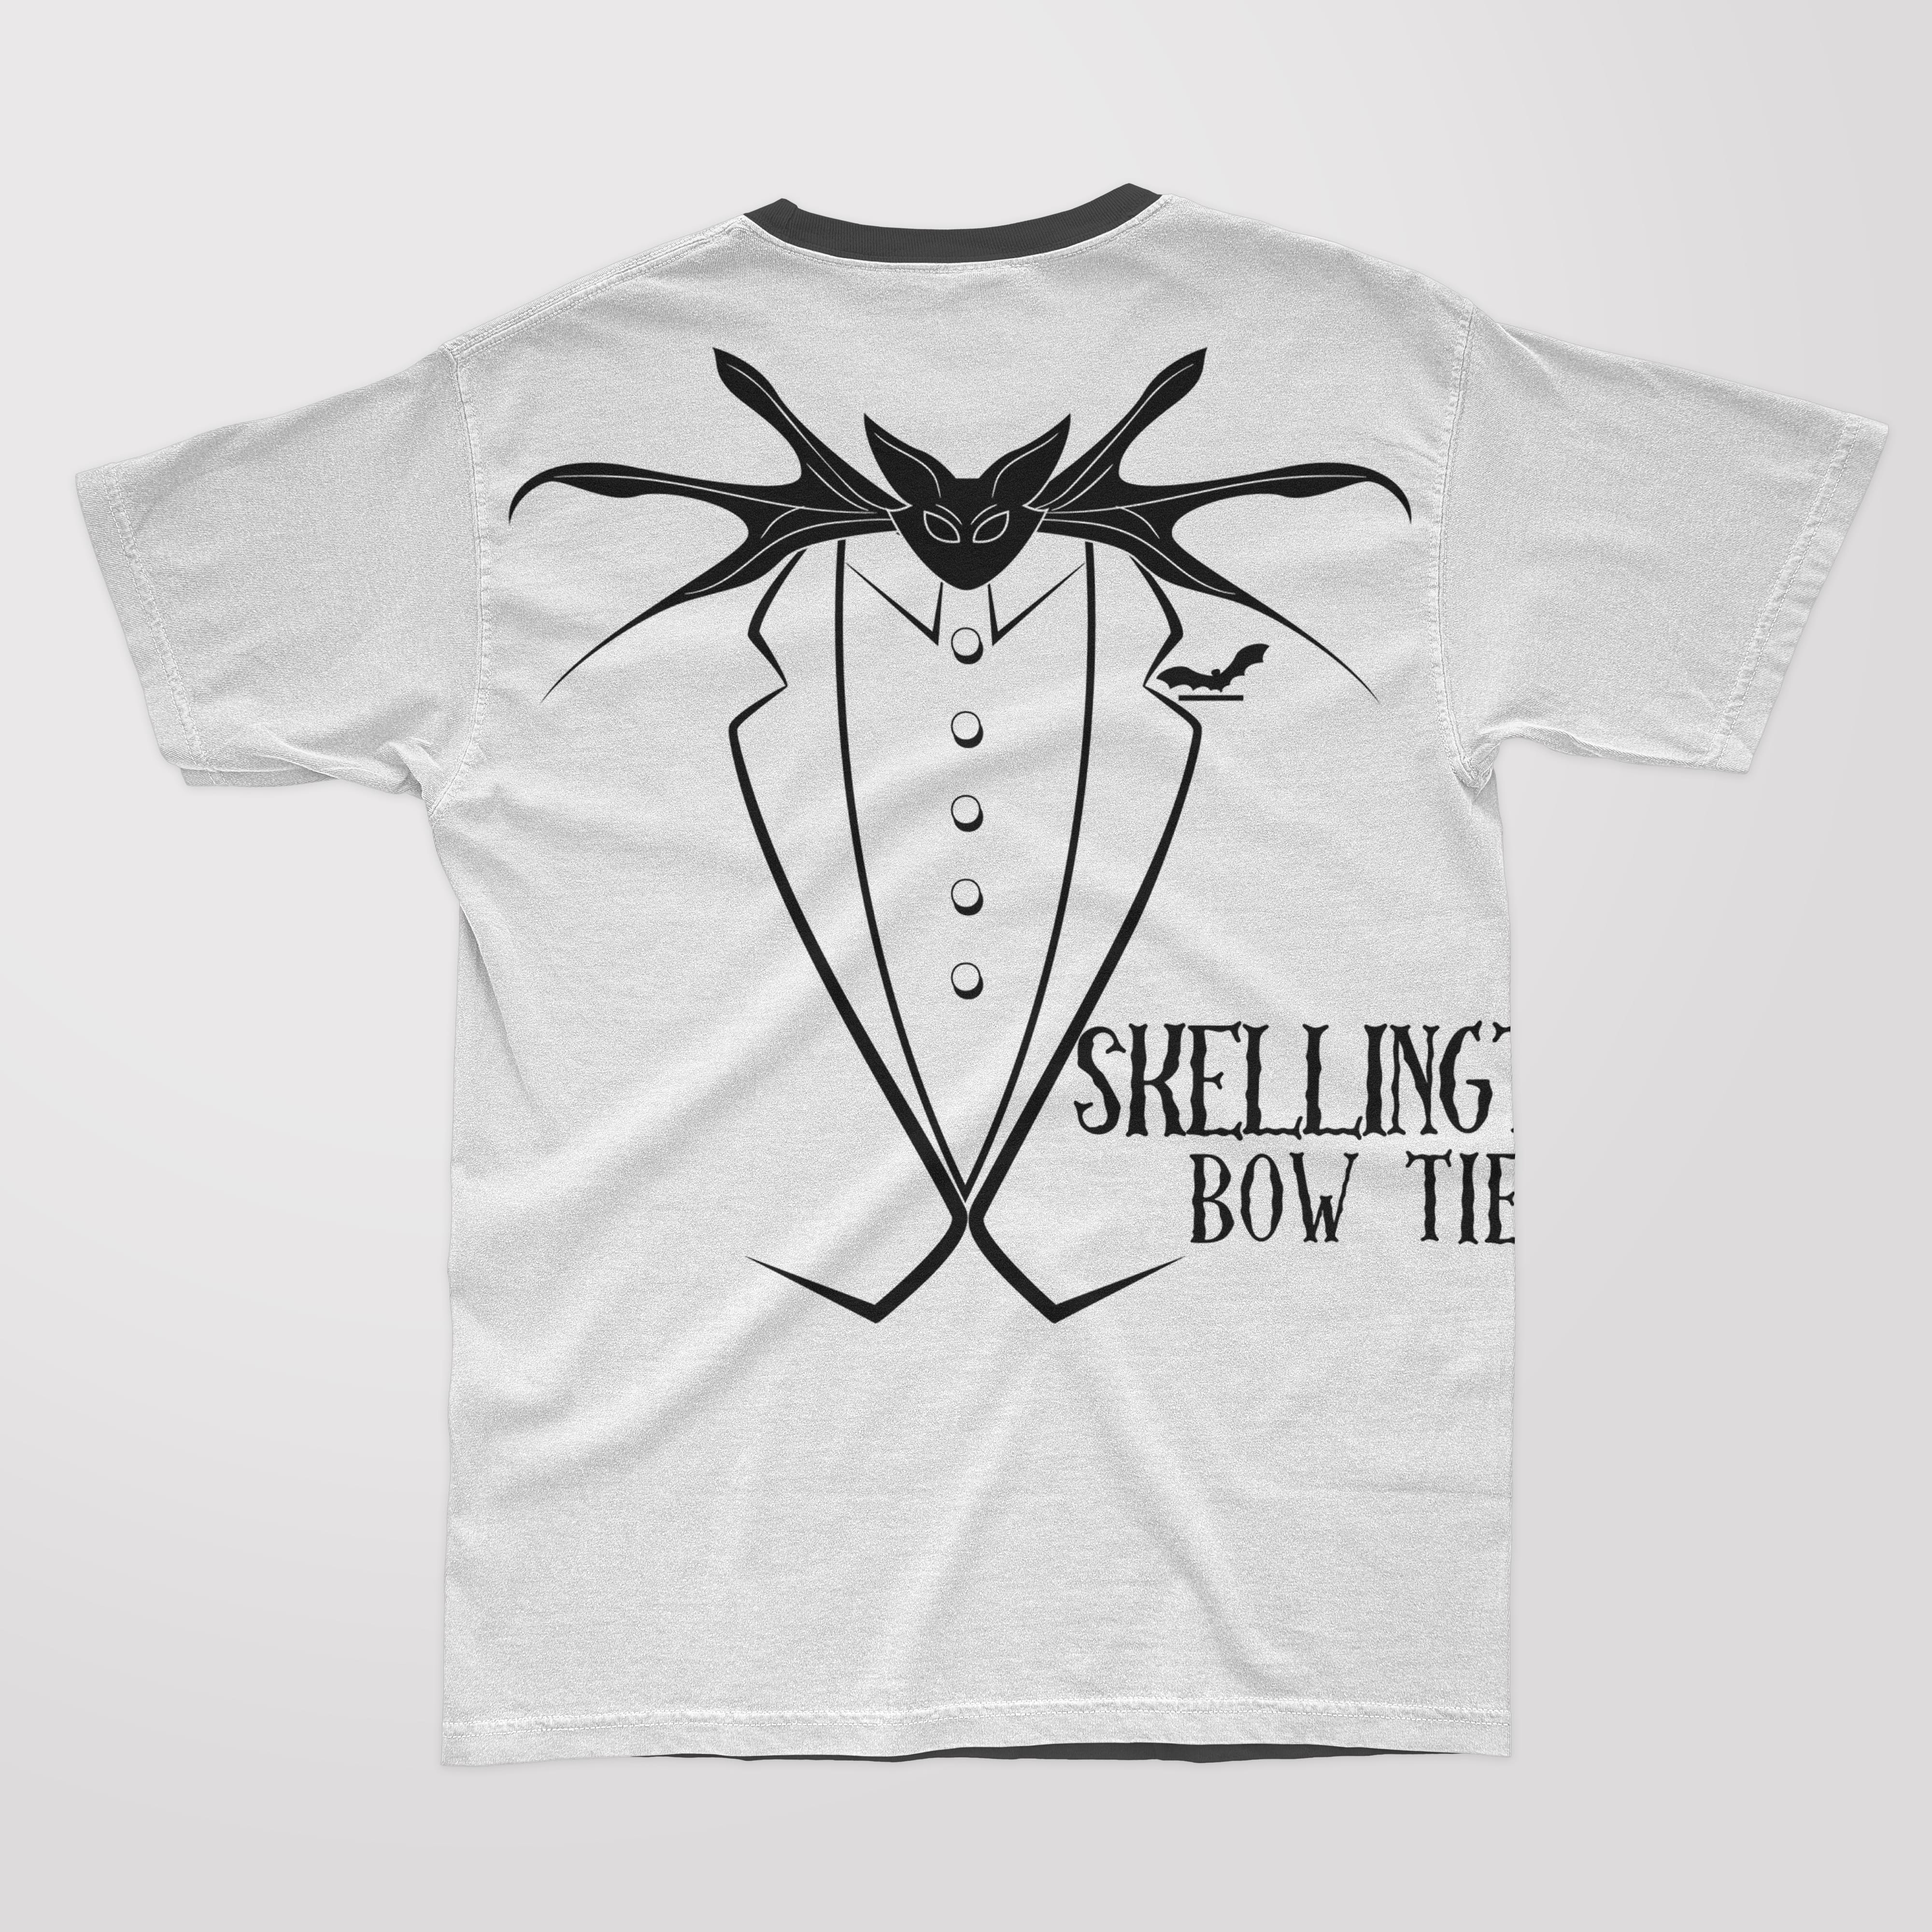 Black lettering "Skelling Bow Tie" and illustration of a skellington bow tie on the white t-shirt with black collar.